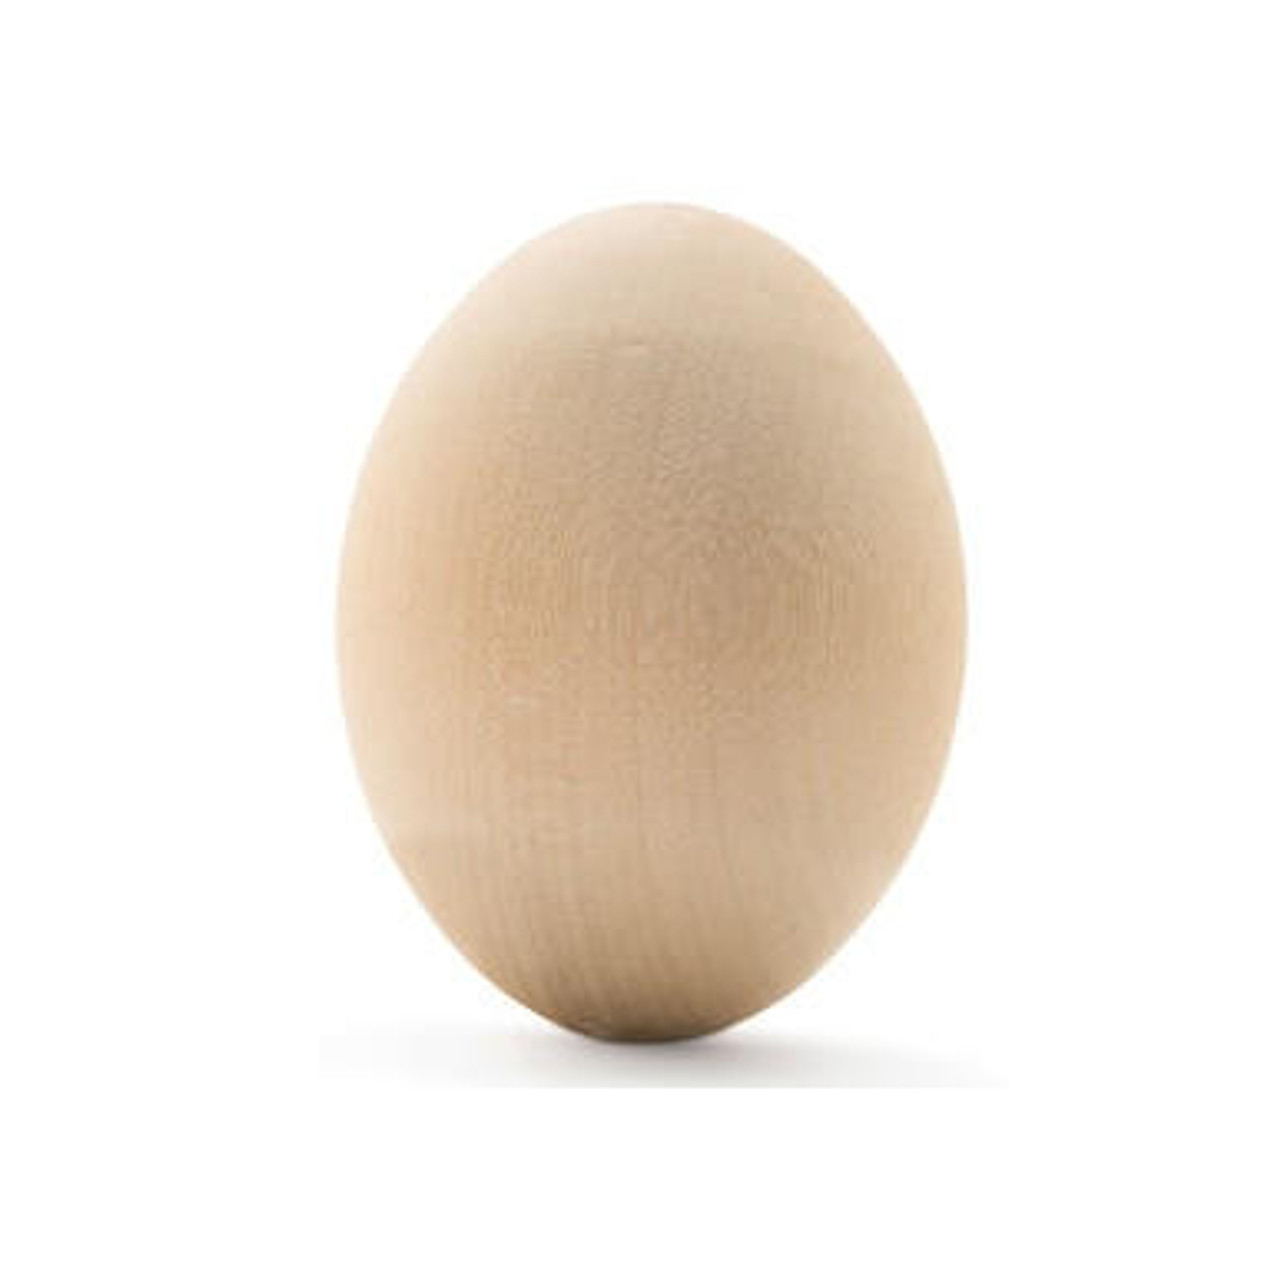 Wood Eggs, Unfinished Wooden Eggs, Easter Crafts